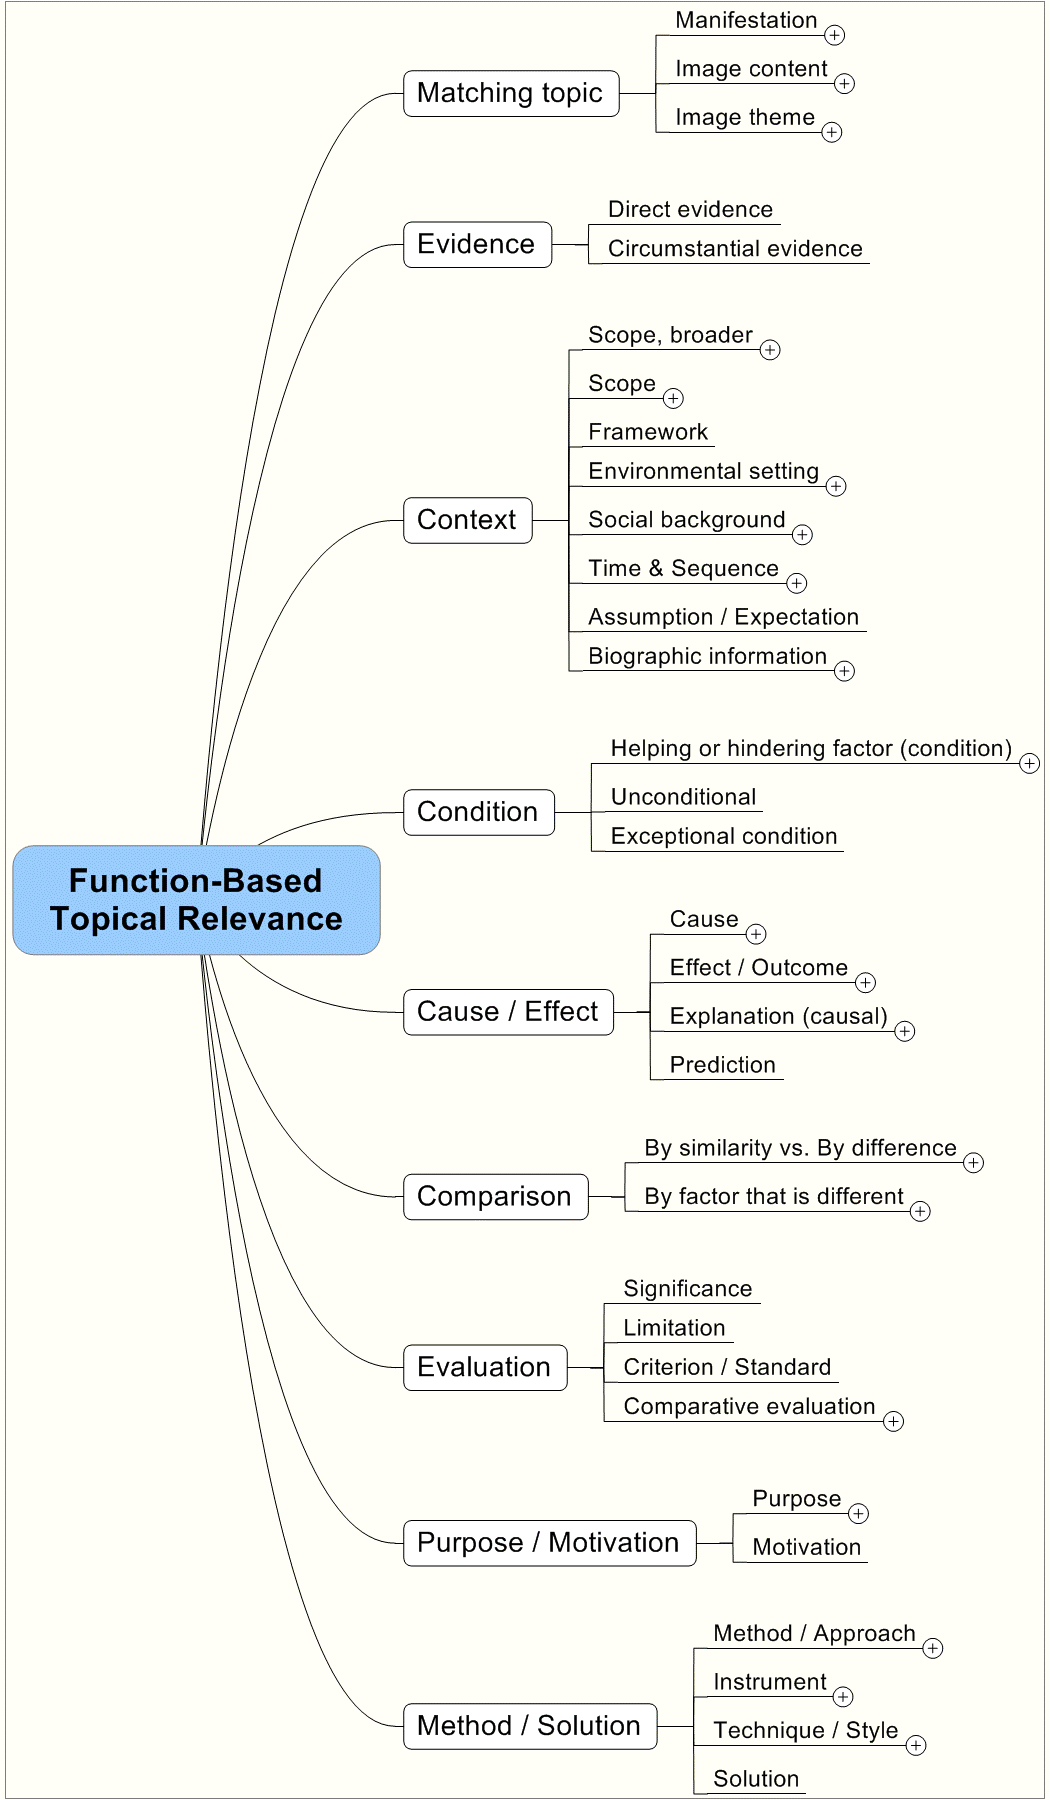 Function-Based Relevant Information Typology